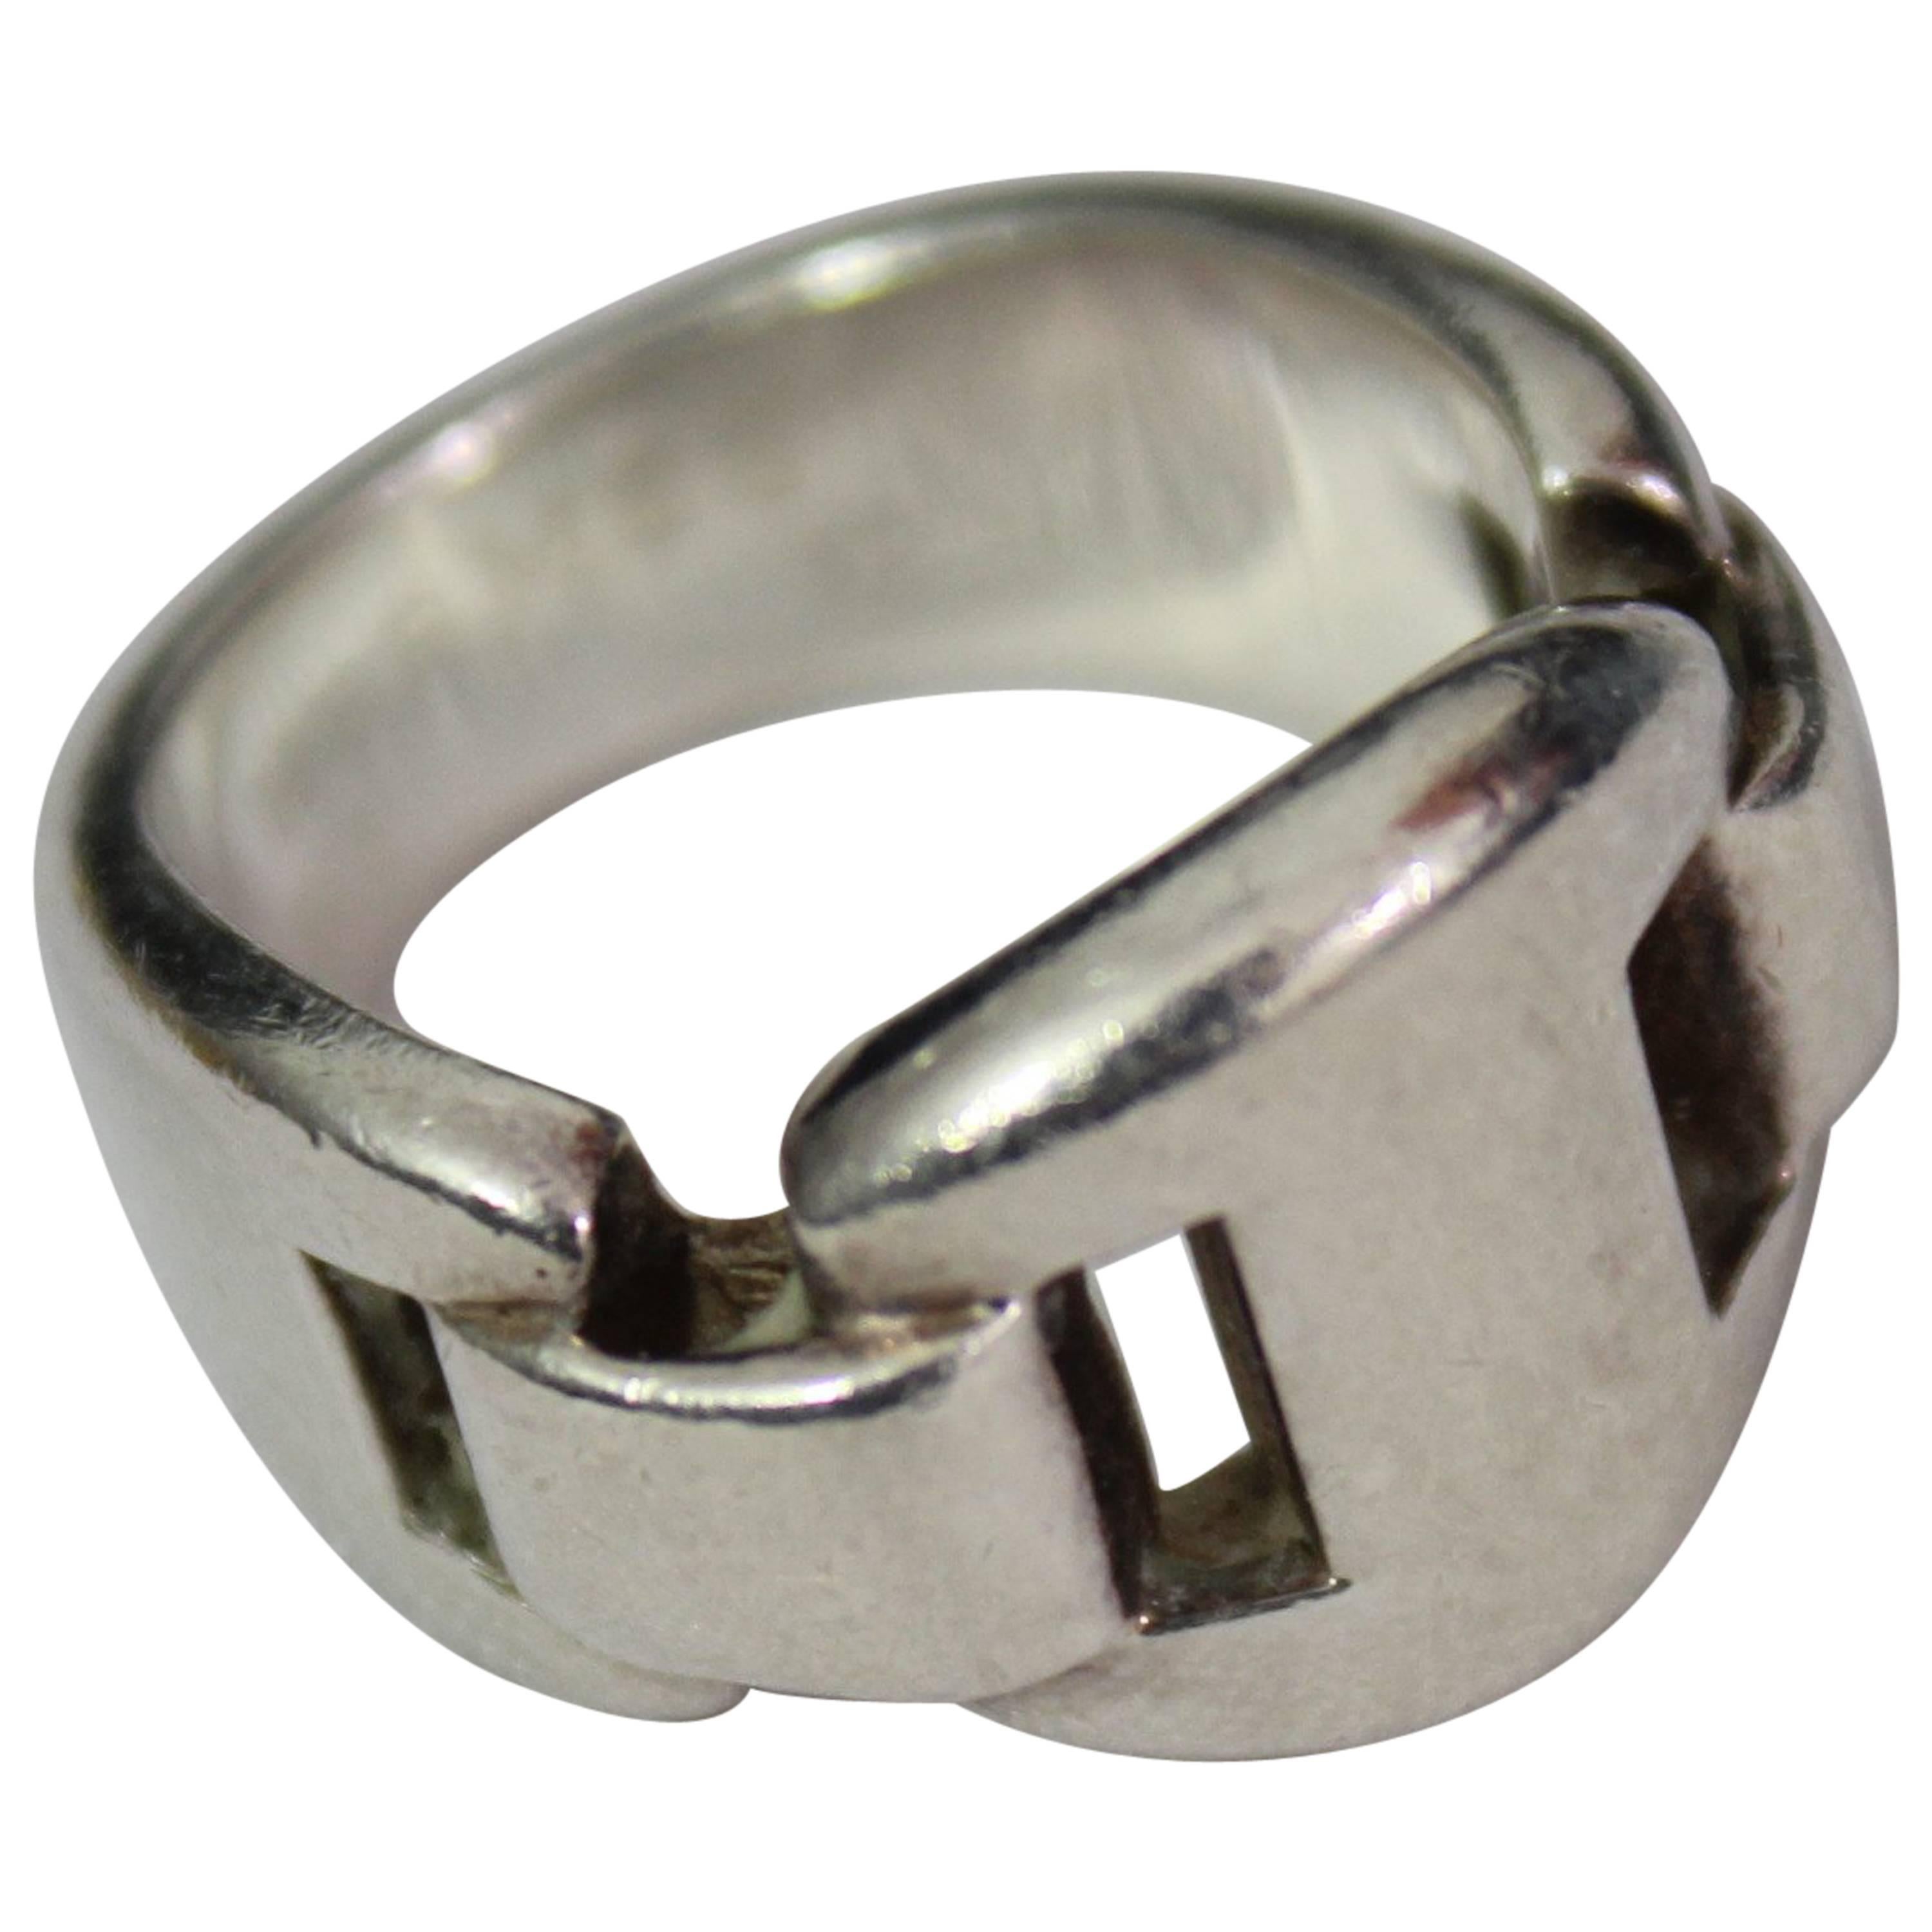 Hermes Good Ring in Sterling Silver Size French 52